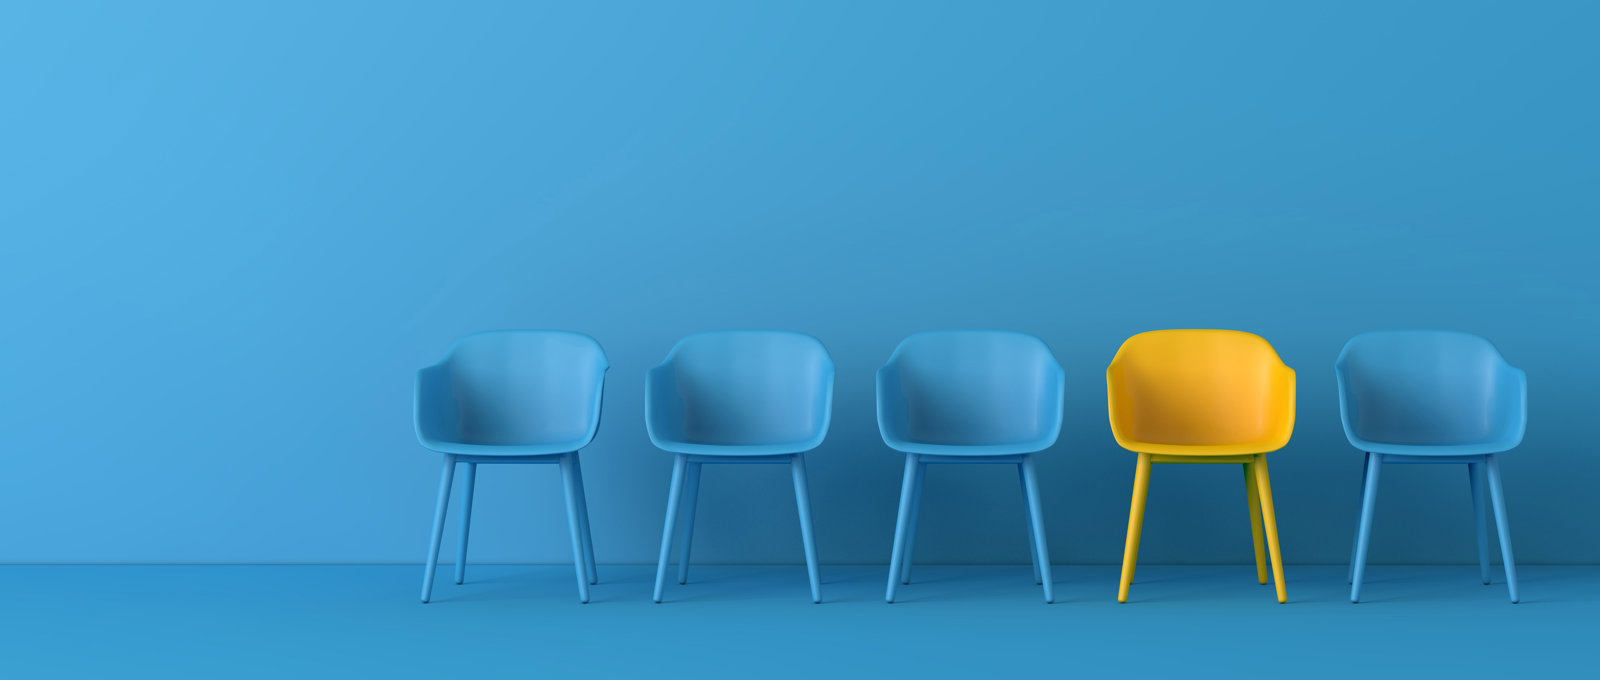 Photo of five chairs against a blue background. All are coloured blue to match the background except one which is bright yellow